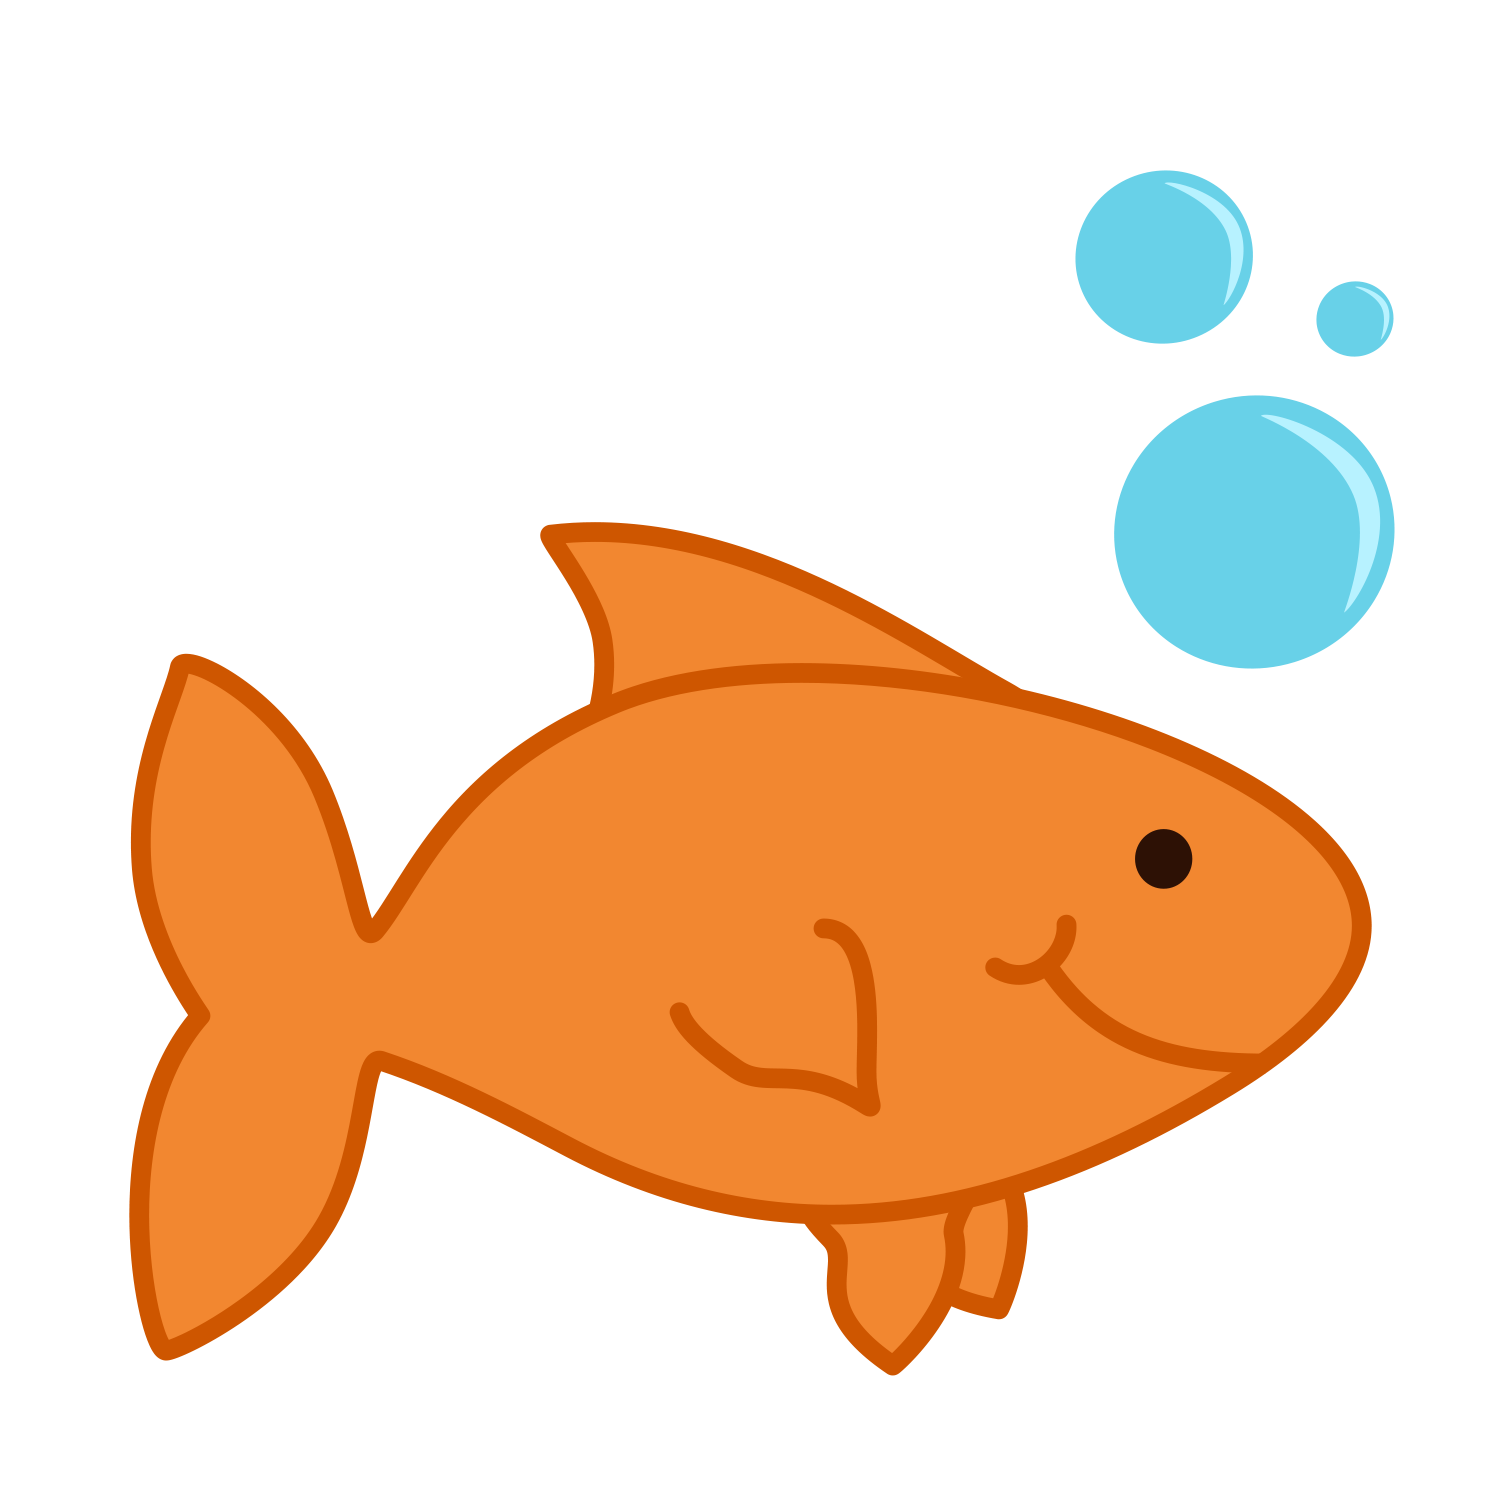 Goldfish Clipart - Free Clipart Images